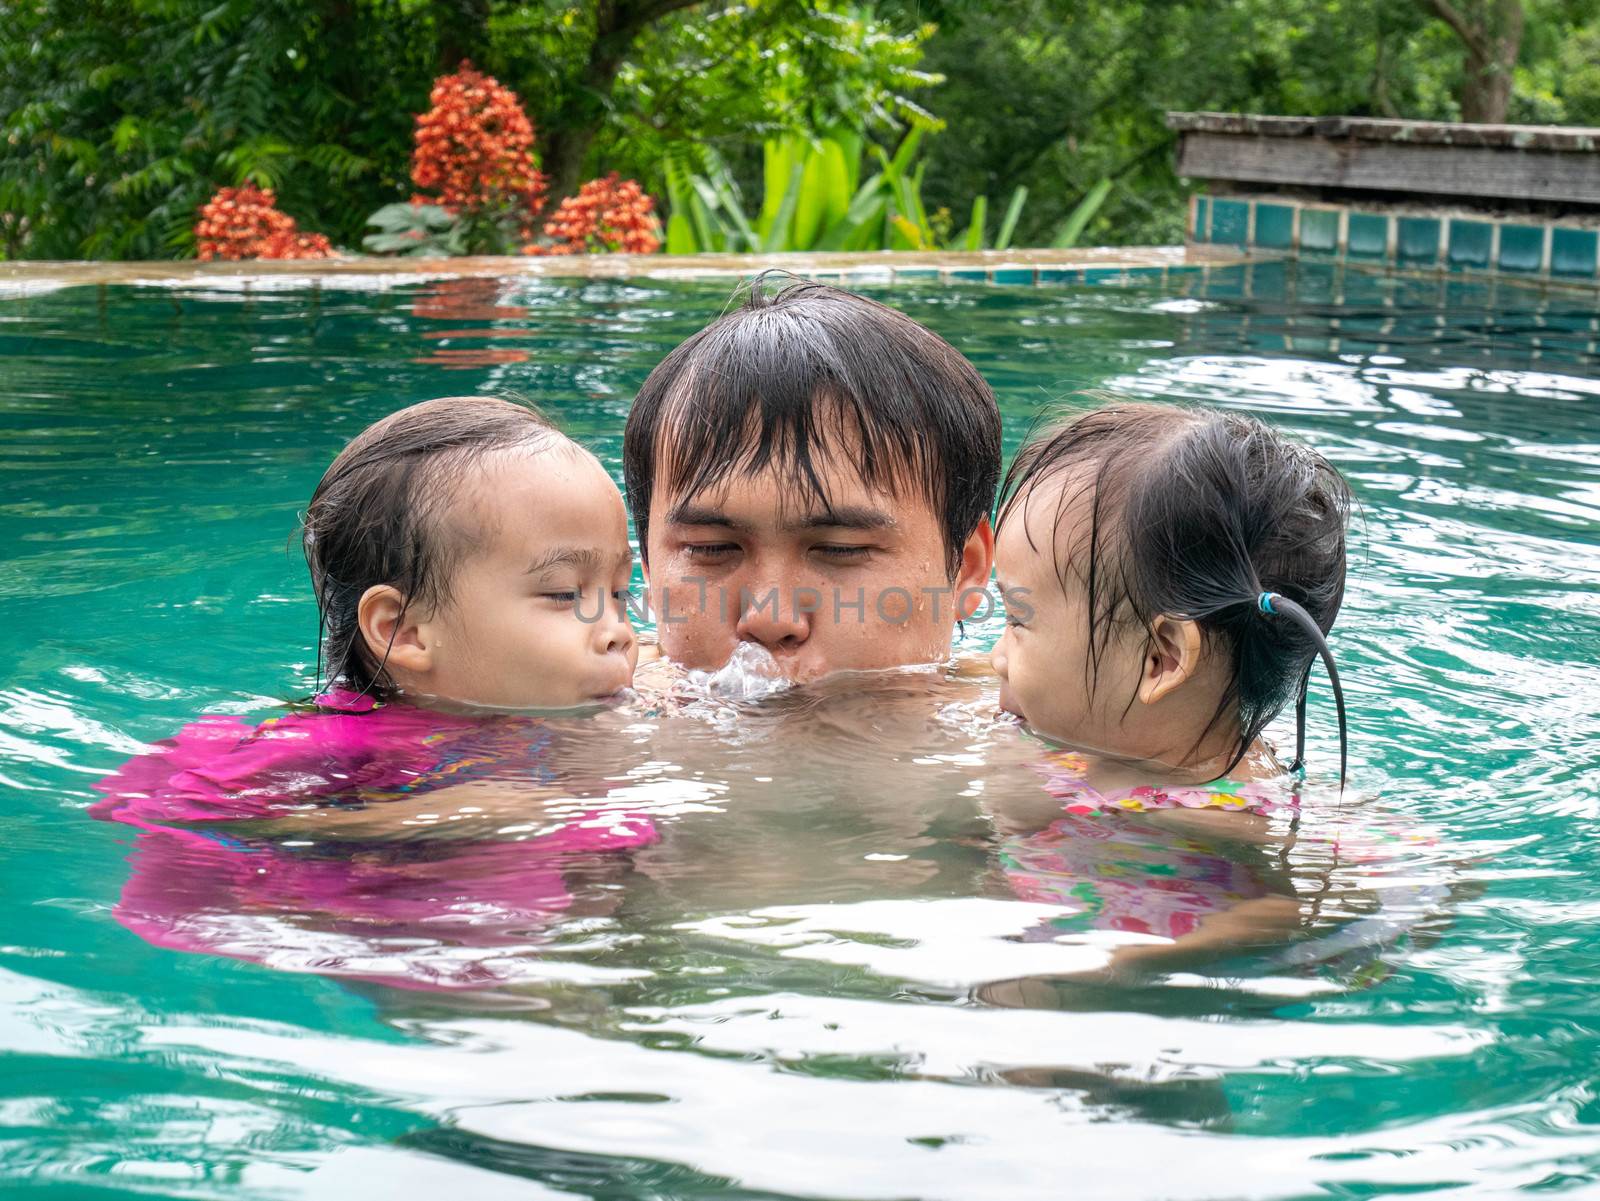 Portrait of Father and daughter enjoying a summer holiday in swimming pool at Northern resort of Thailand. by TEERASAK